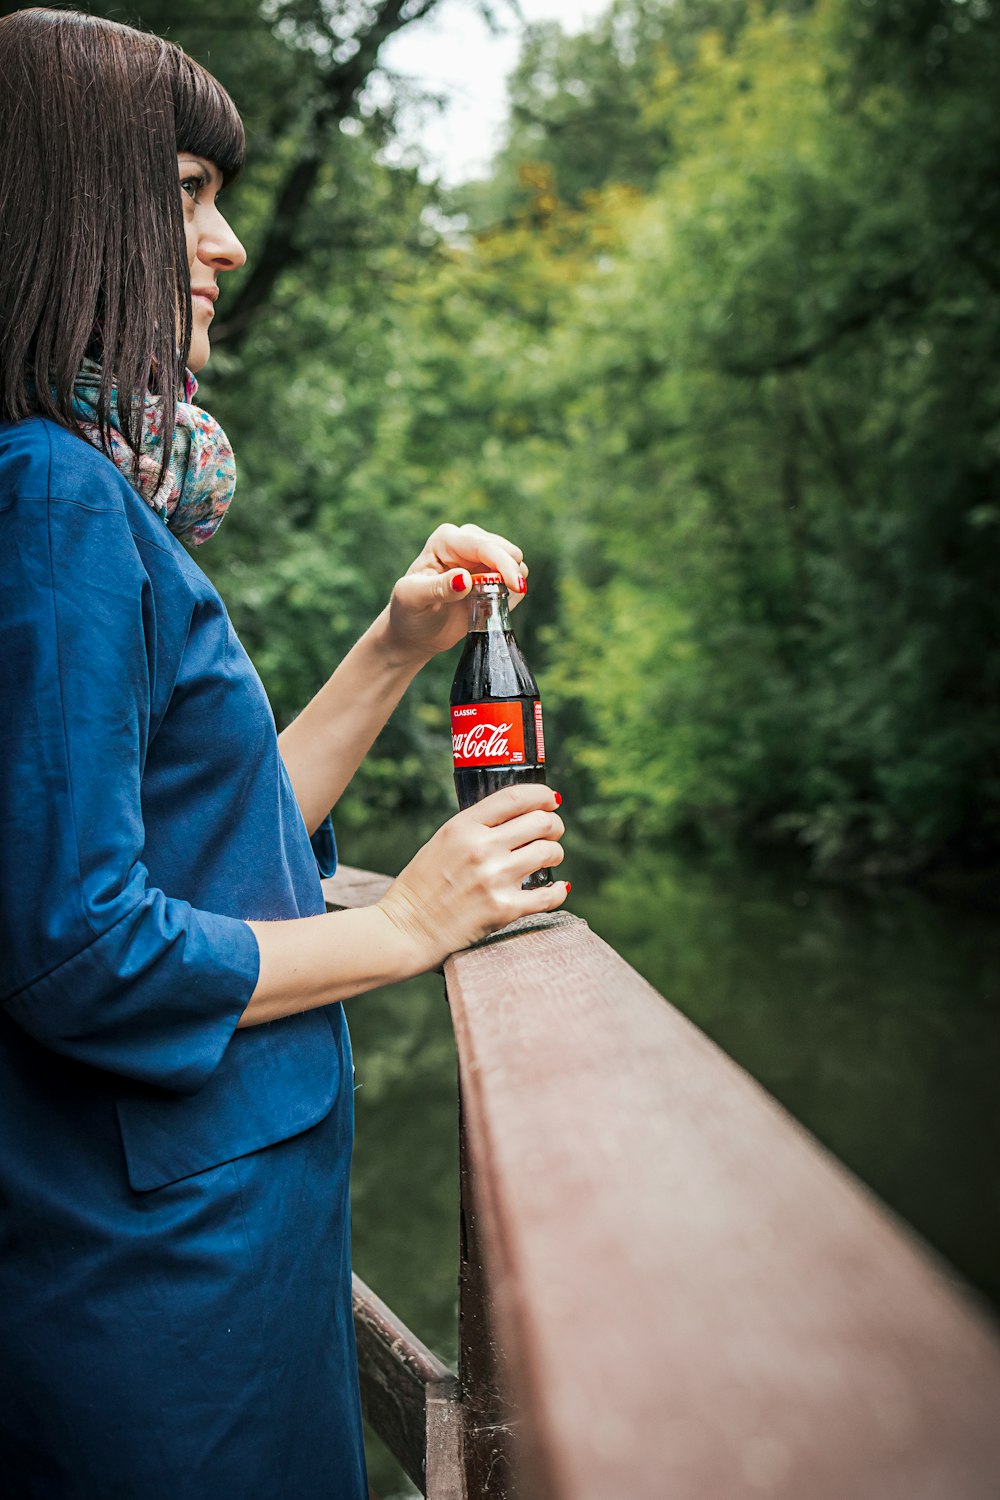 smiling woman standing and holding Coca-Cola soda bottle